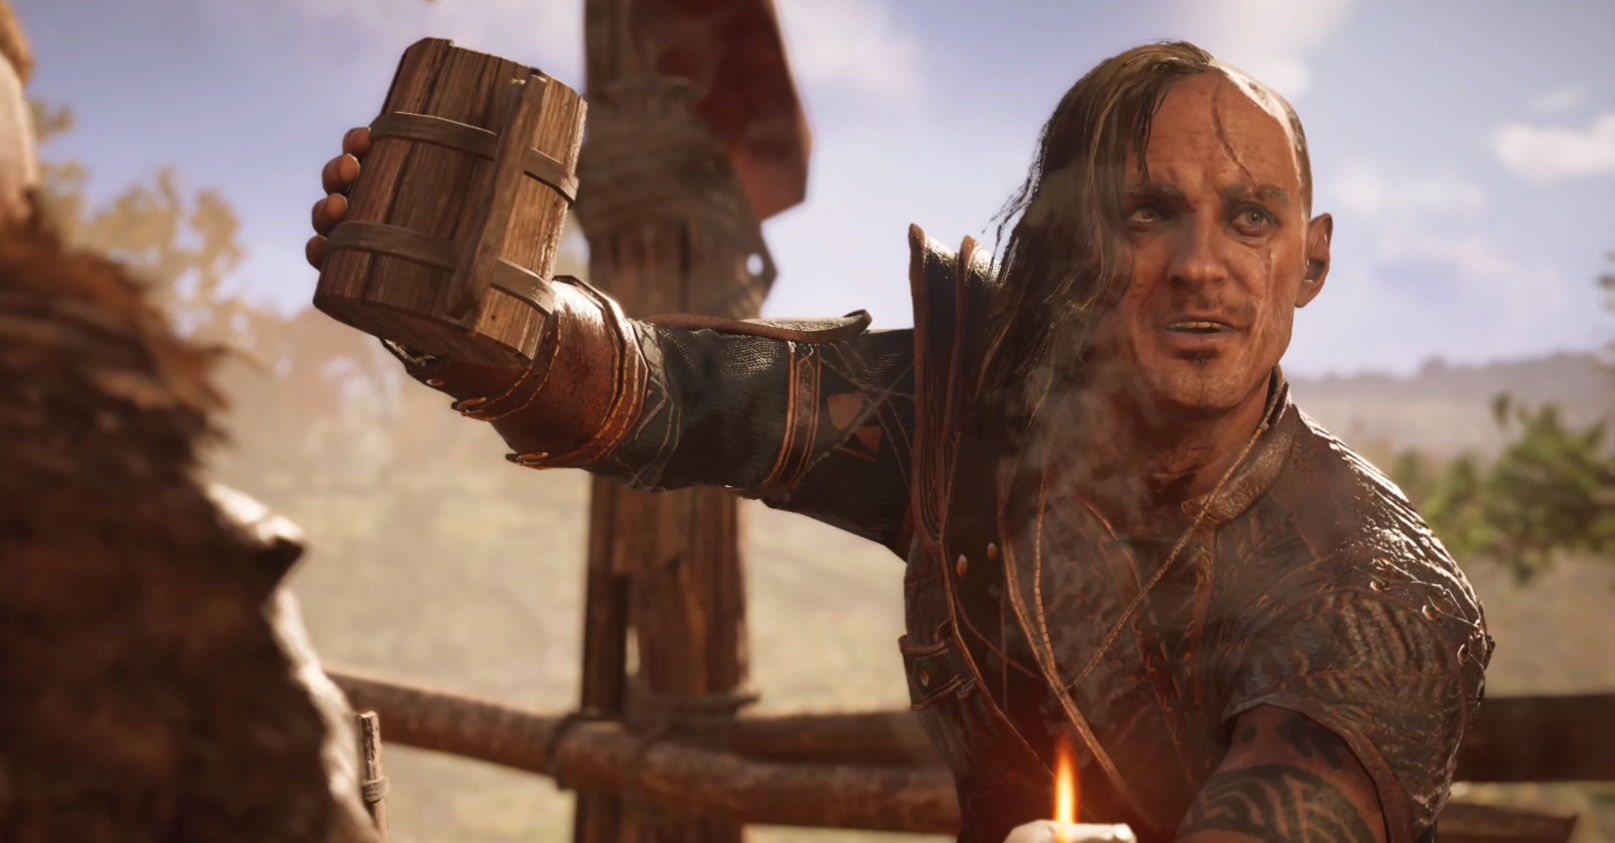  How Assassin's Creed Valhalla's historical characters stack up to the real deals 